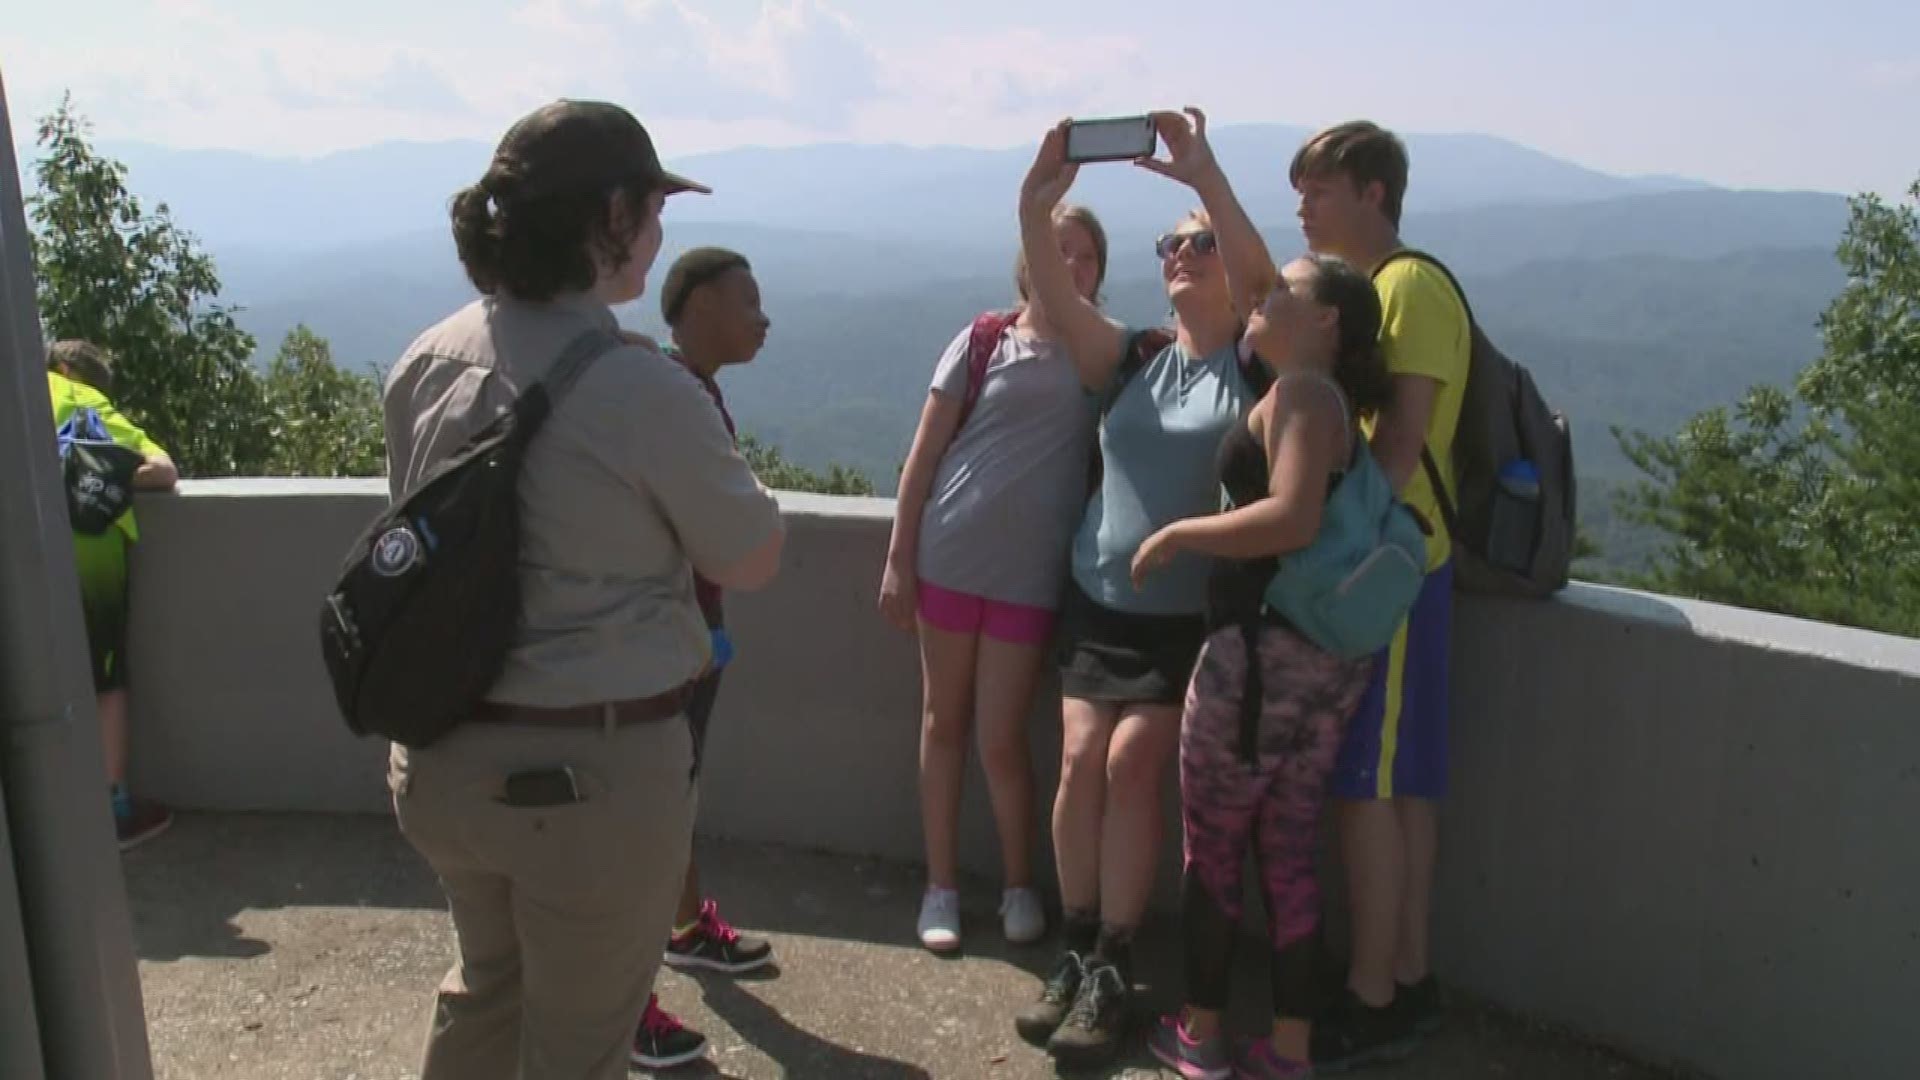 For many of the kids, it was their first visit to GSMNP.